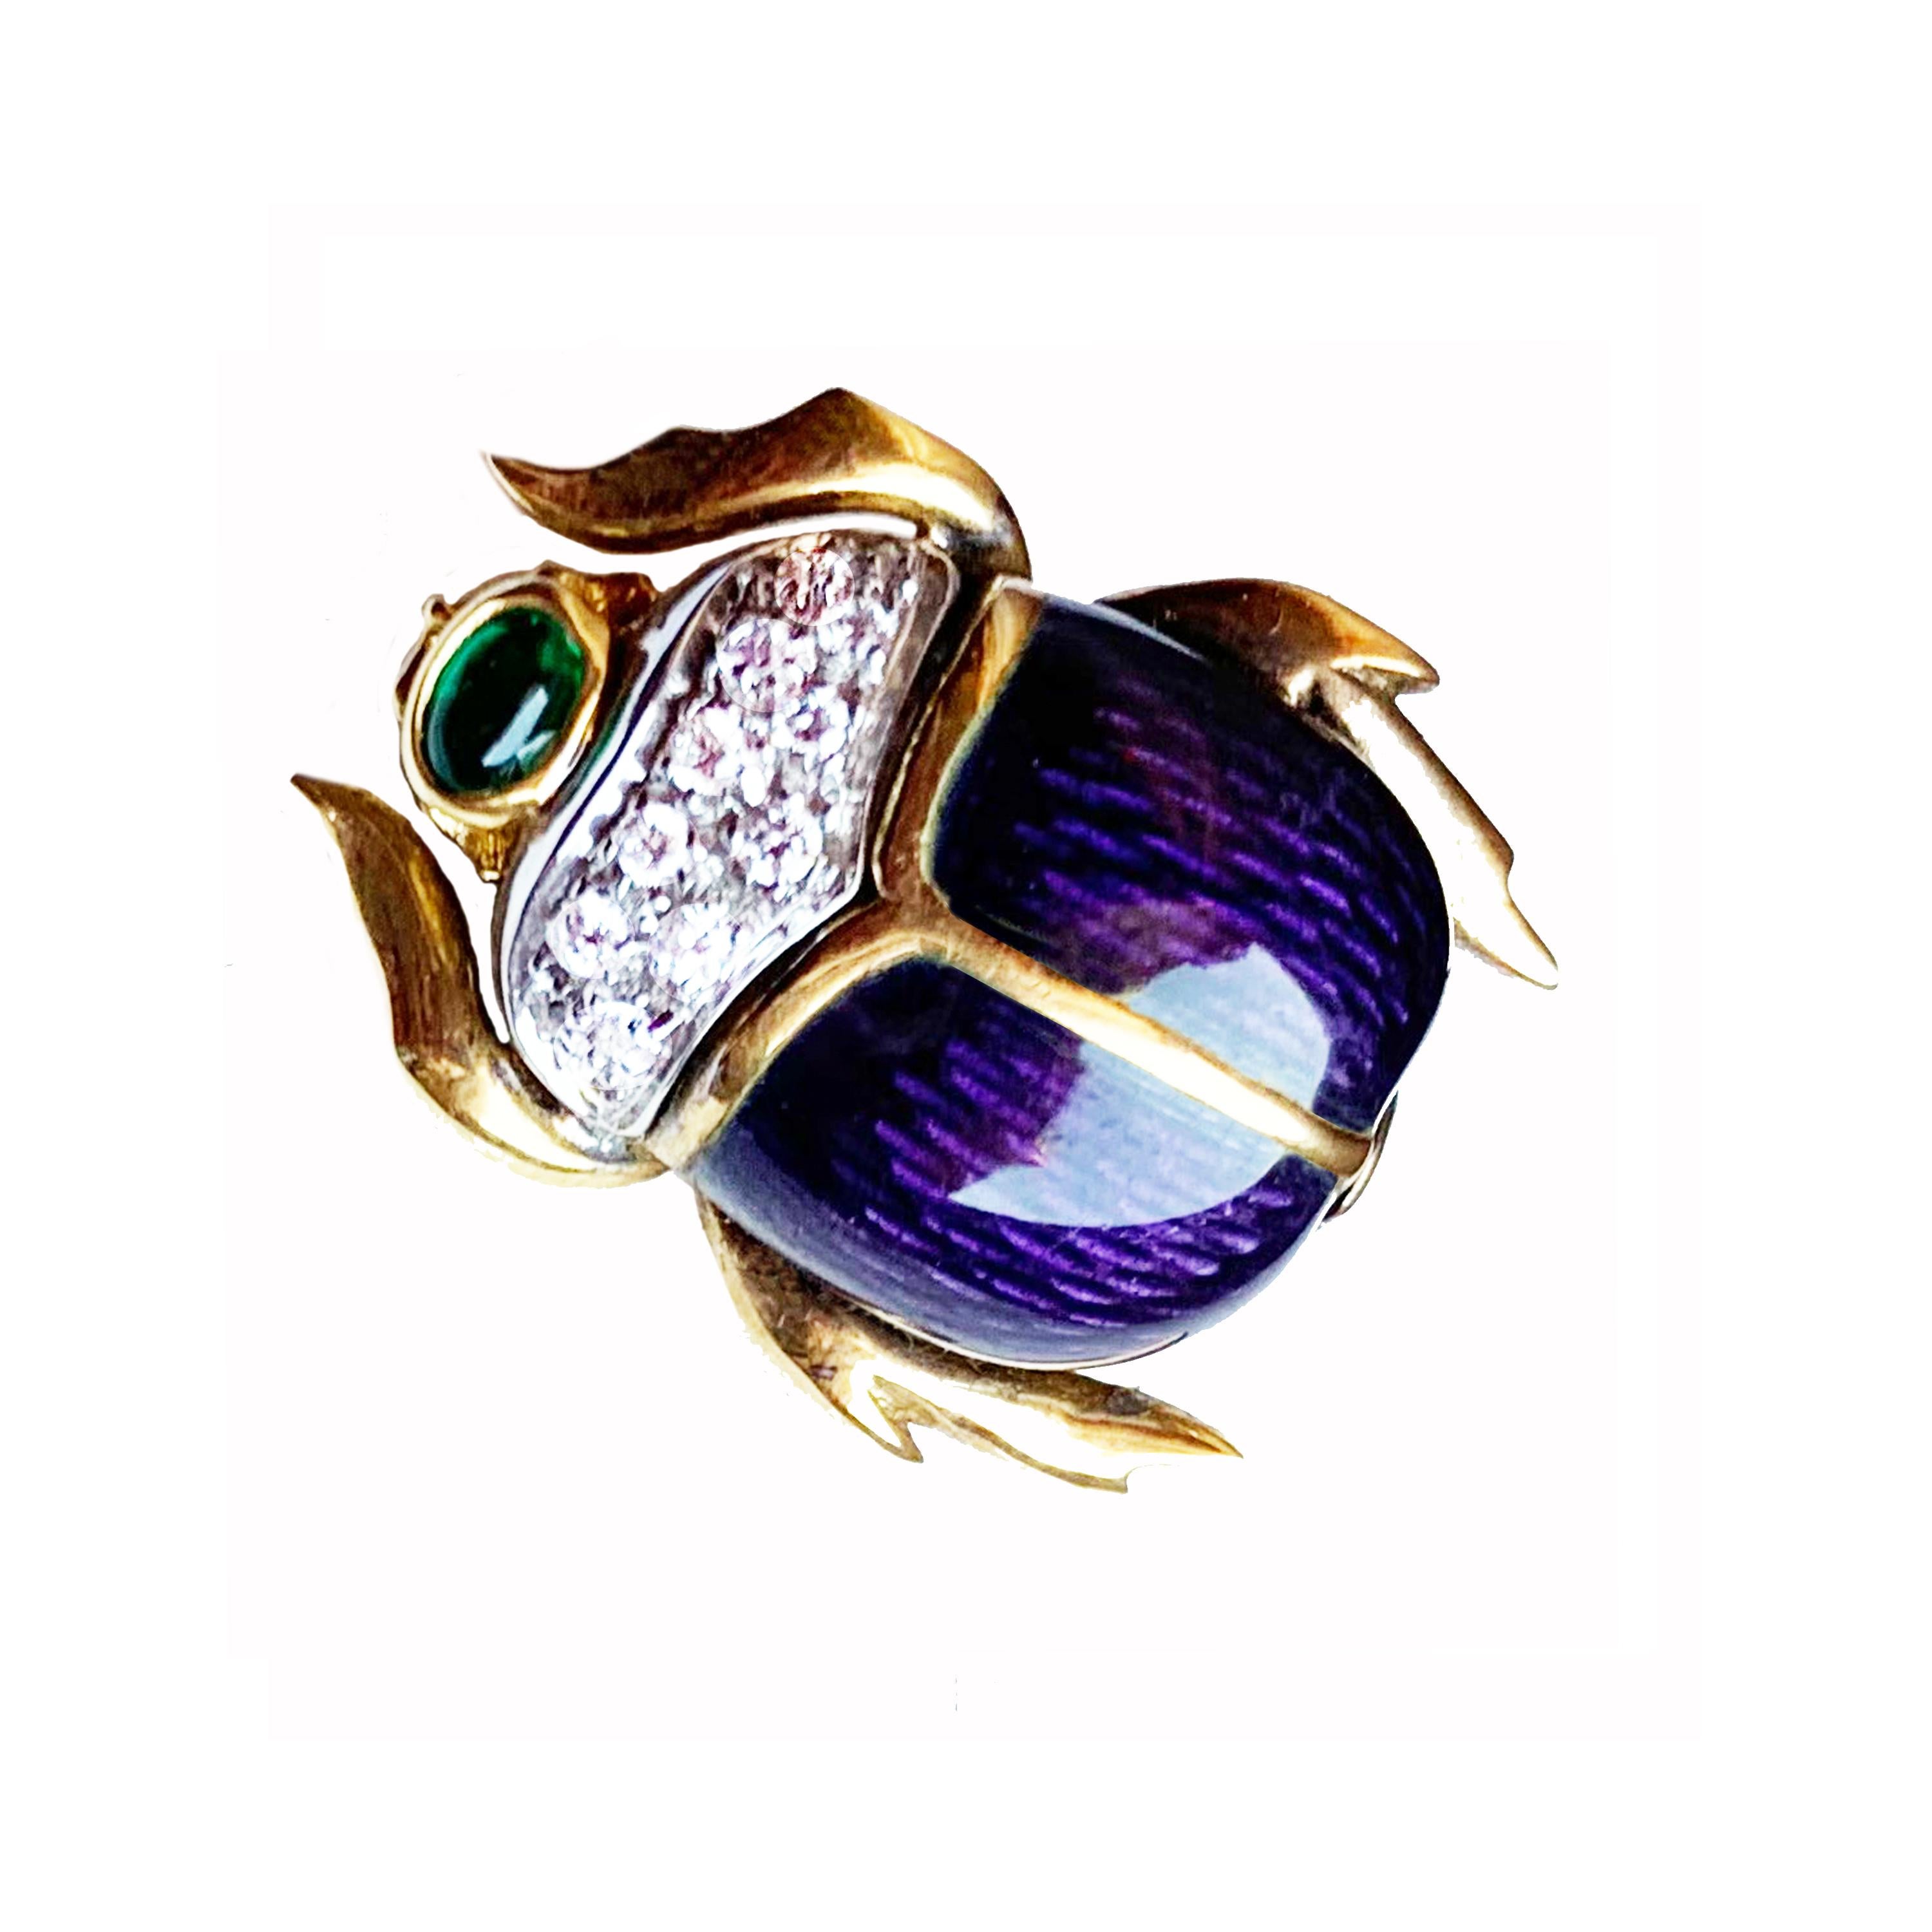 This beautiful brooch in 18 Kt gold, enamels, diamonds and emerald, which depicts a scarab, was made by a talented Italian goldsmith
Over the history and religious beliefs surrounding the Scarab Symbol which was one of the most important religious